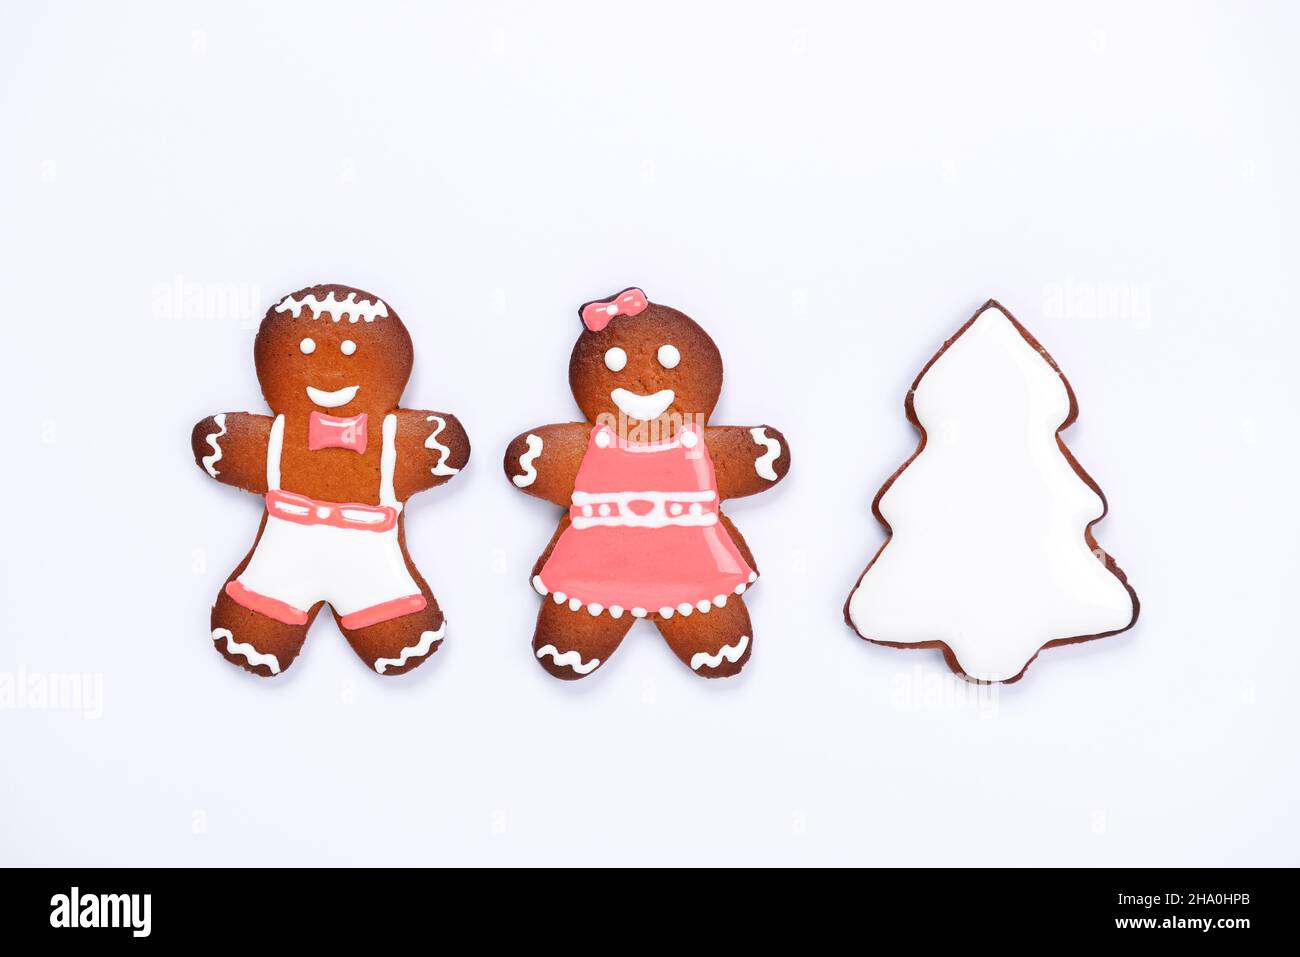 The hand-made eatable gingerbread little men and New Year Tree on white background Stock Photo